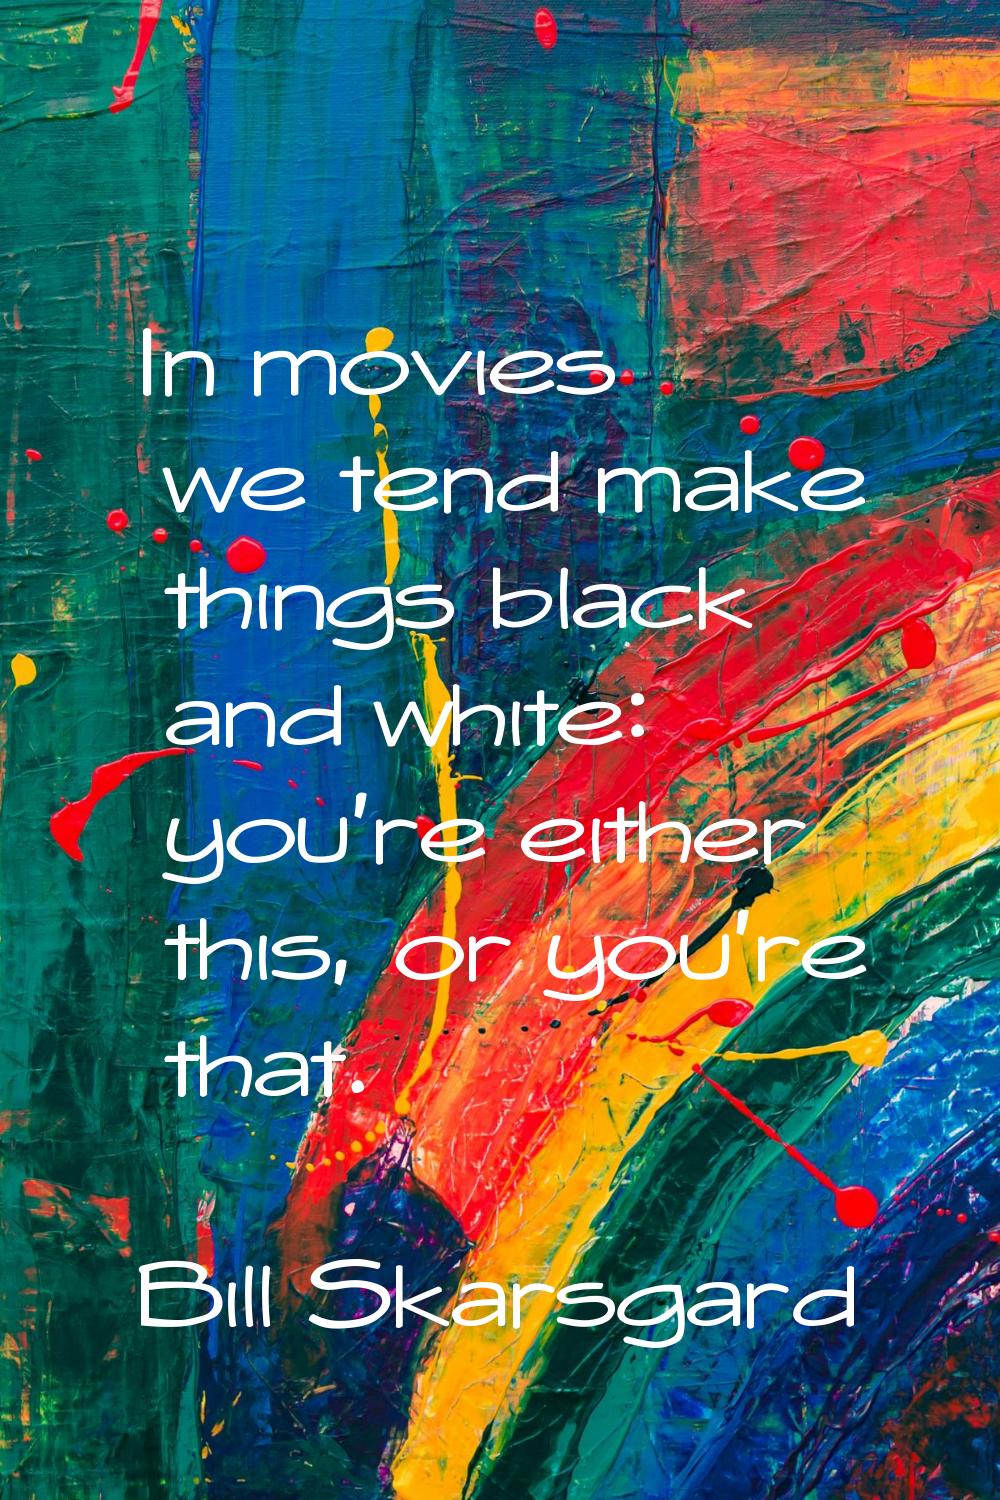 In movies we tend make things black and white: you're either this, or you're that.